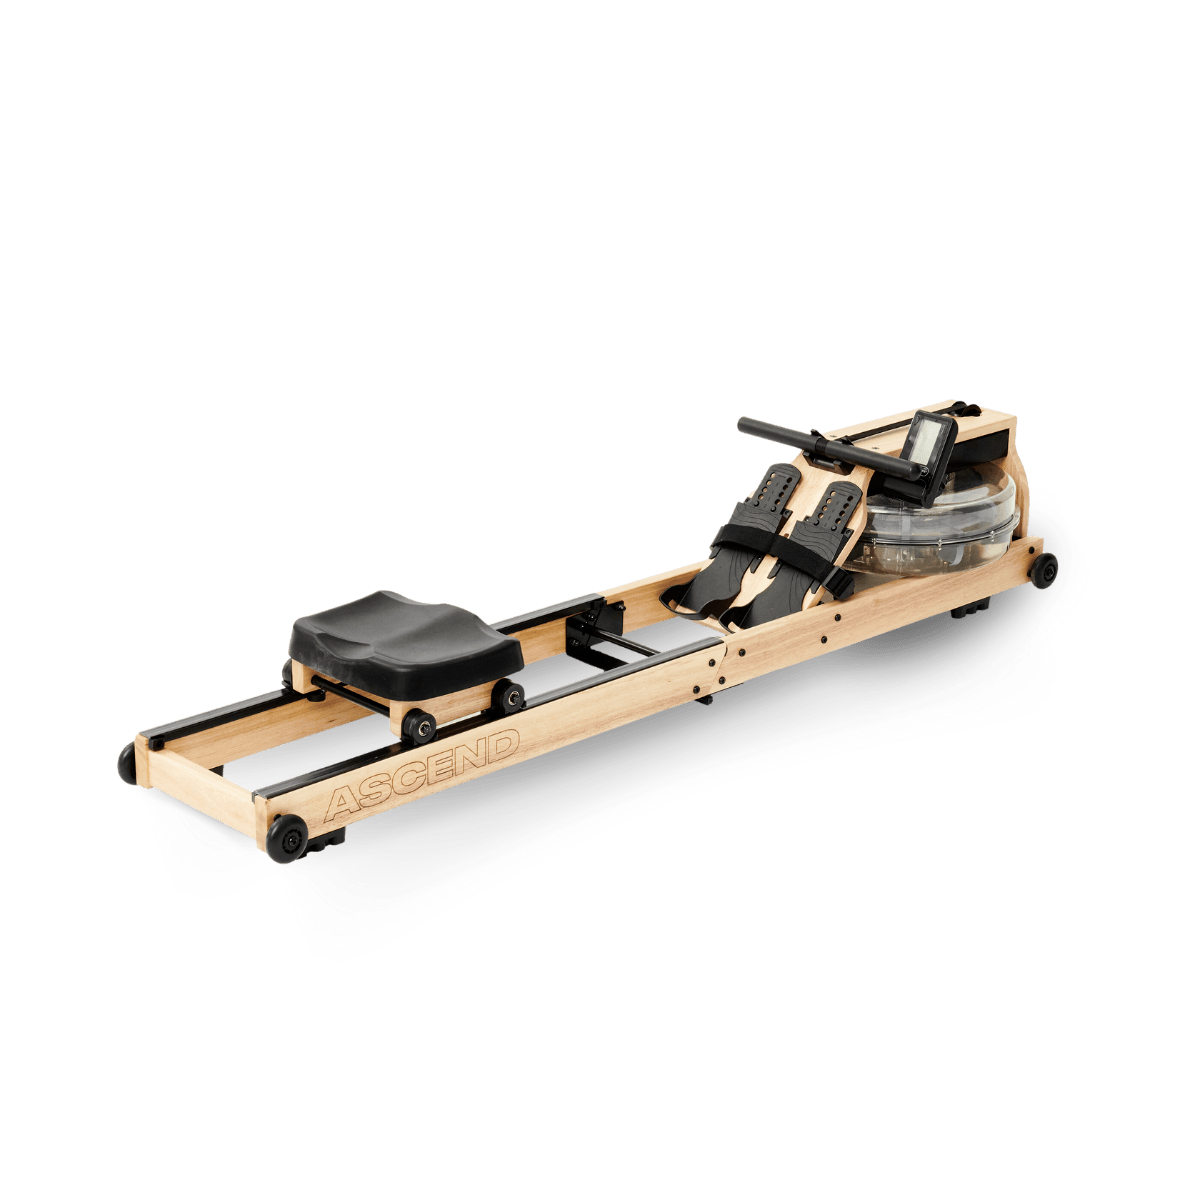 Ascend R-300 | Foldable Wooden Water Rower